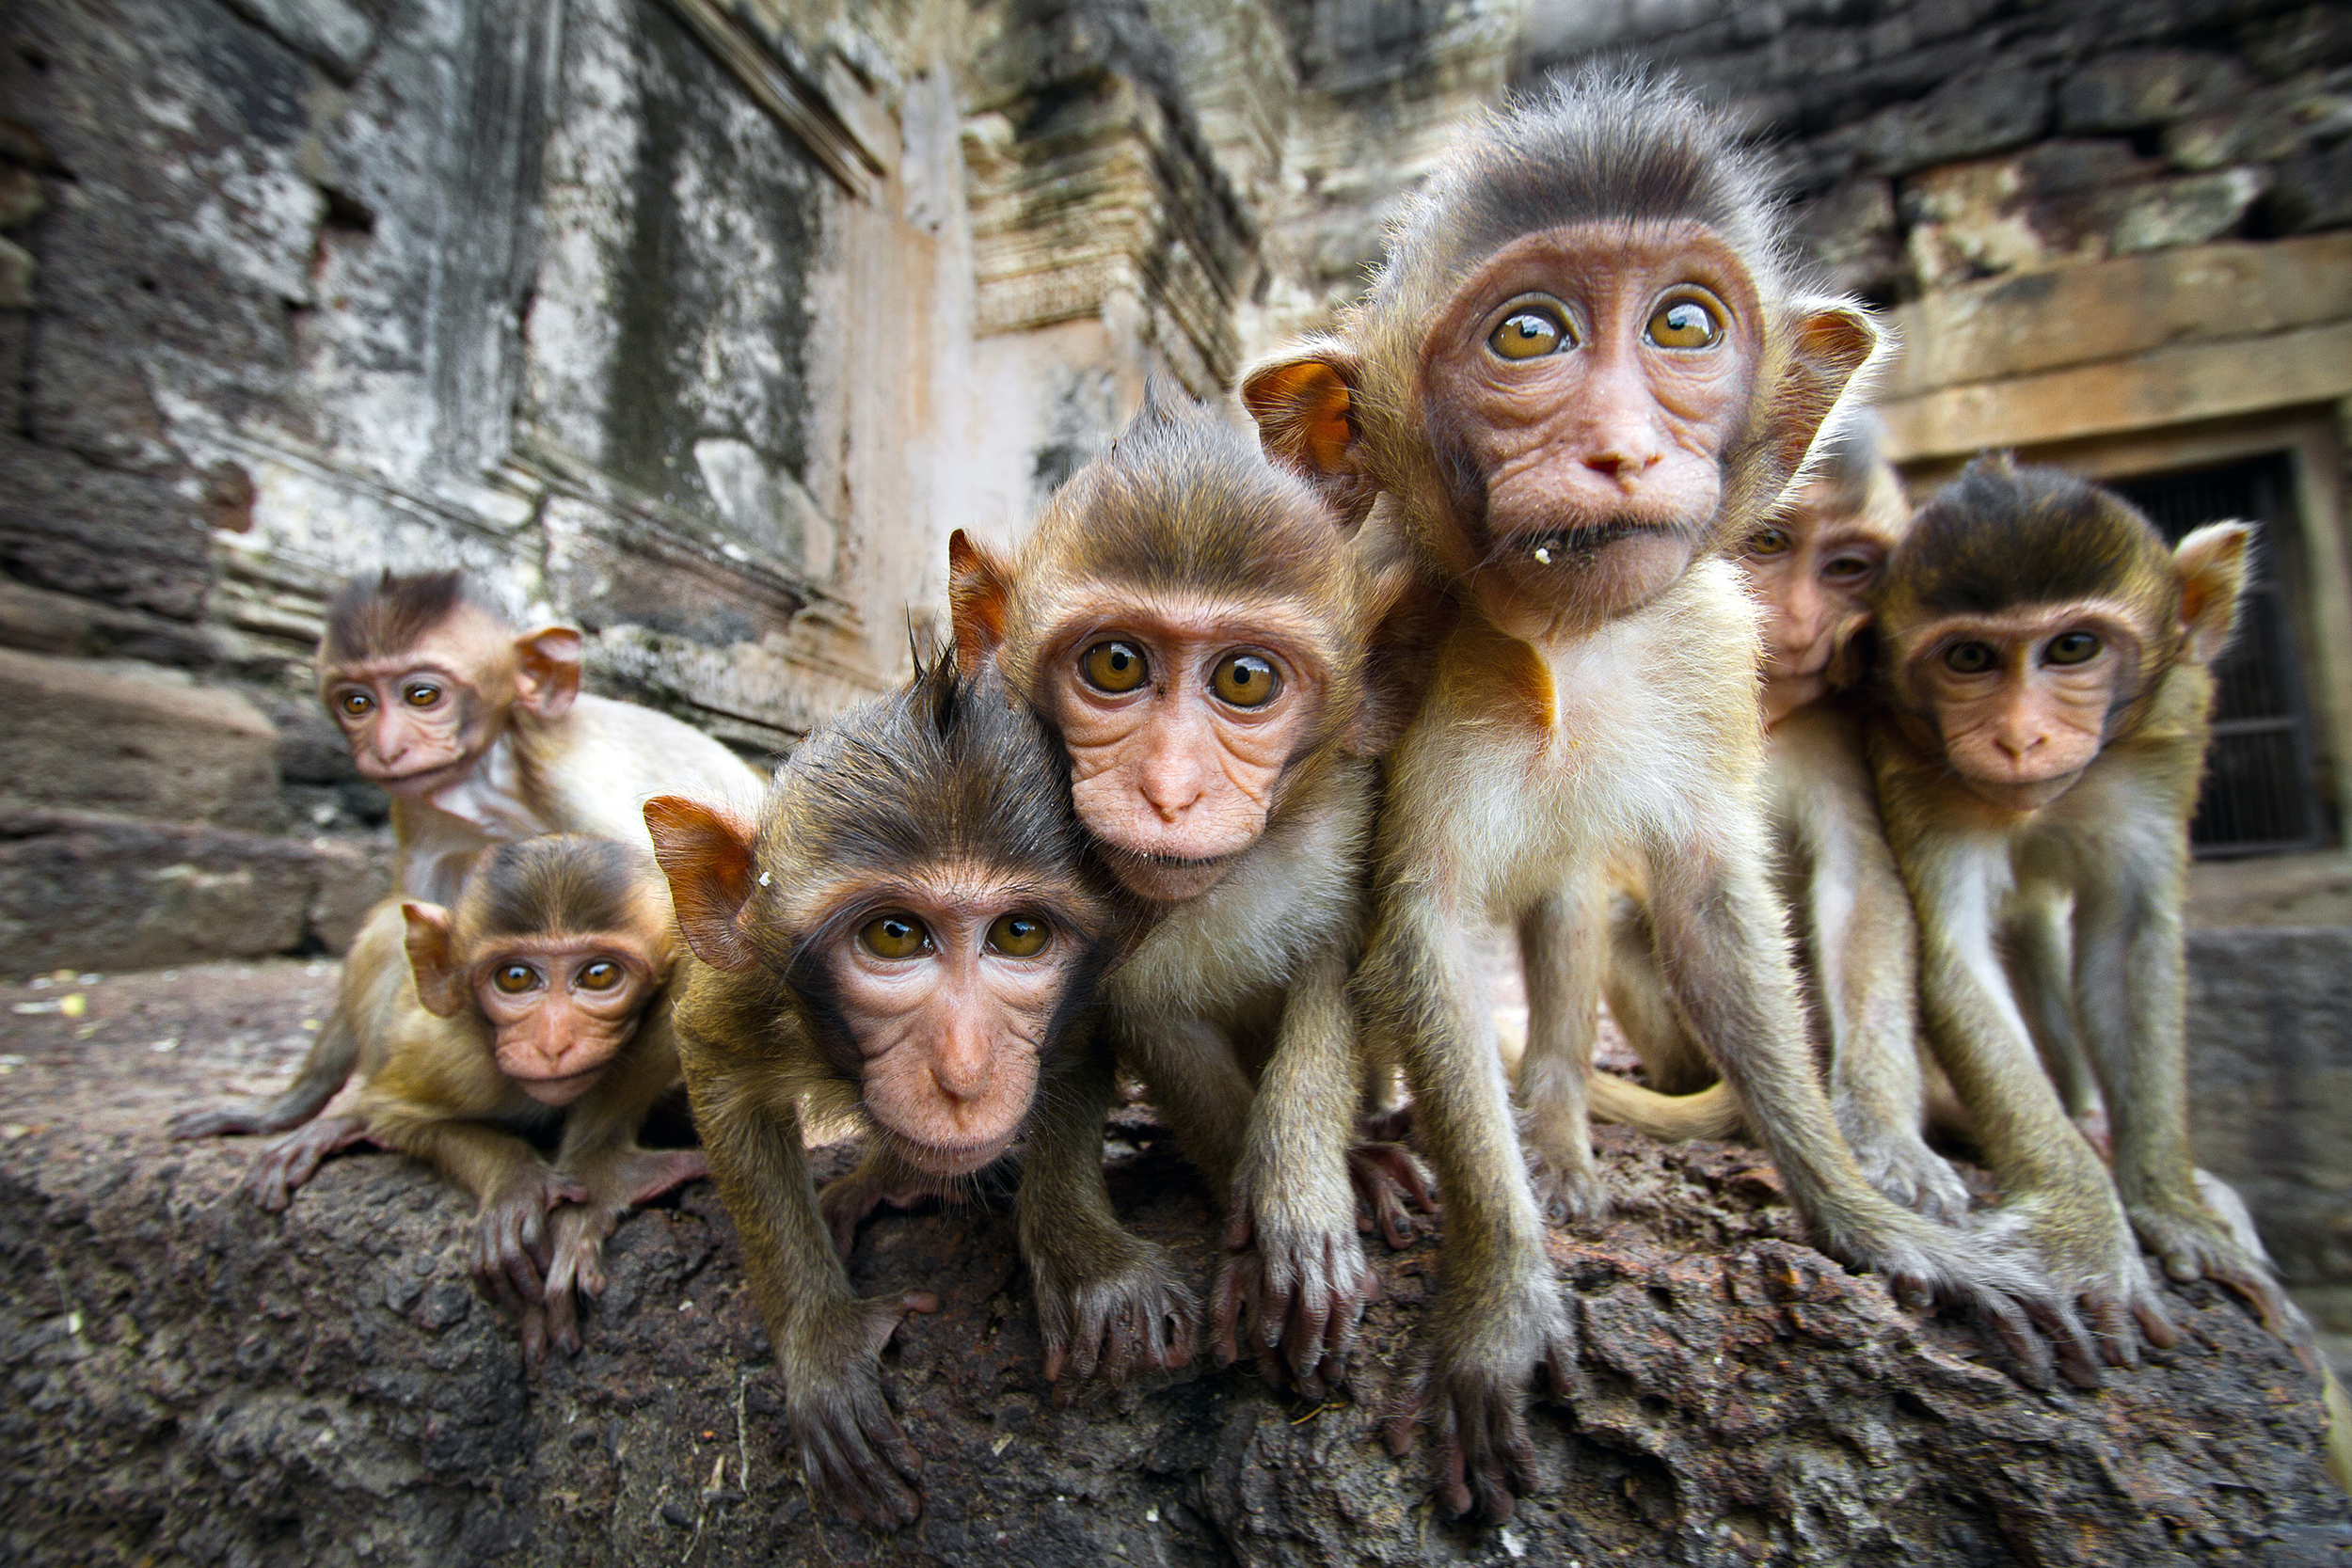 Close up of a group of monkeys